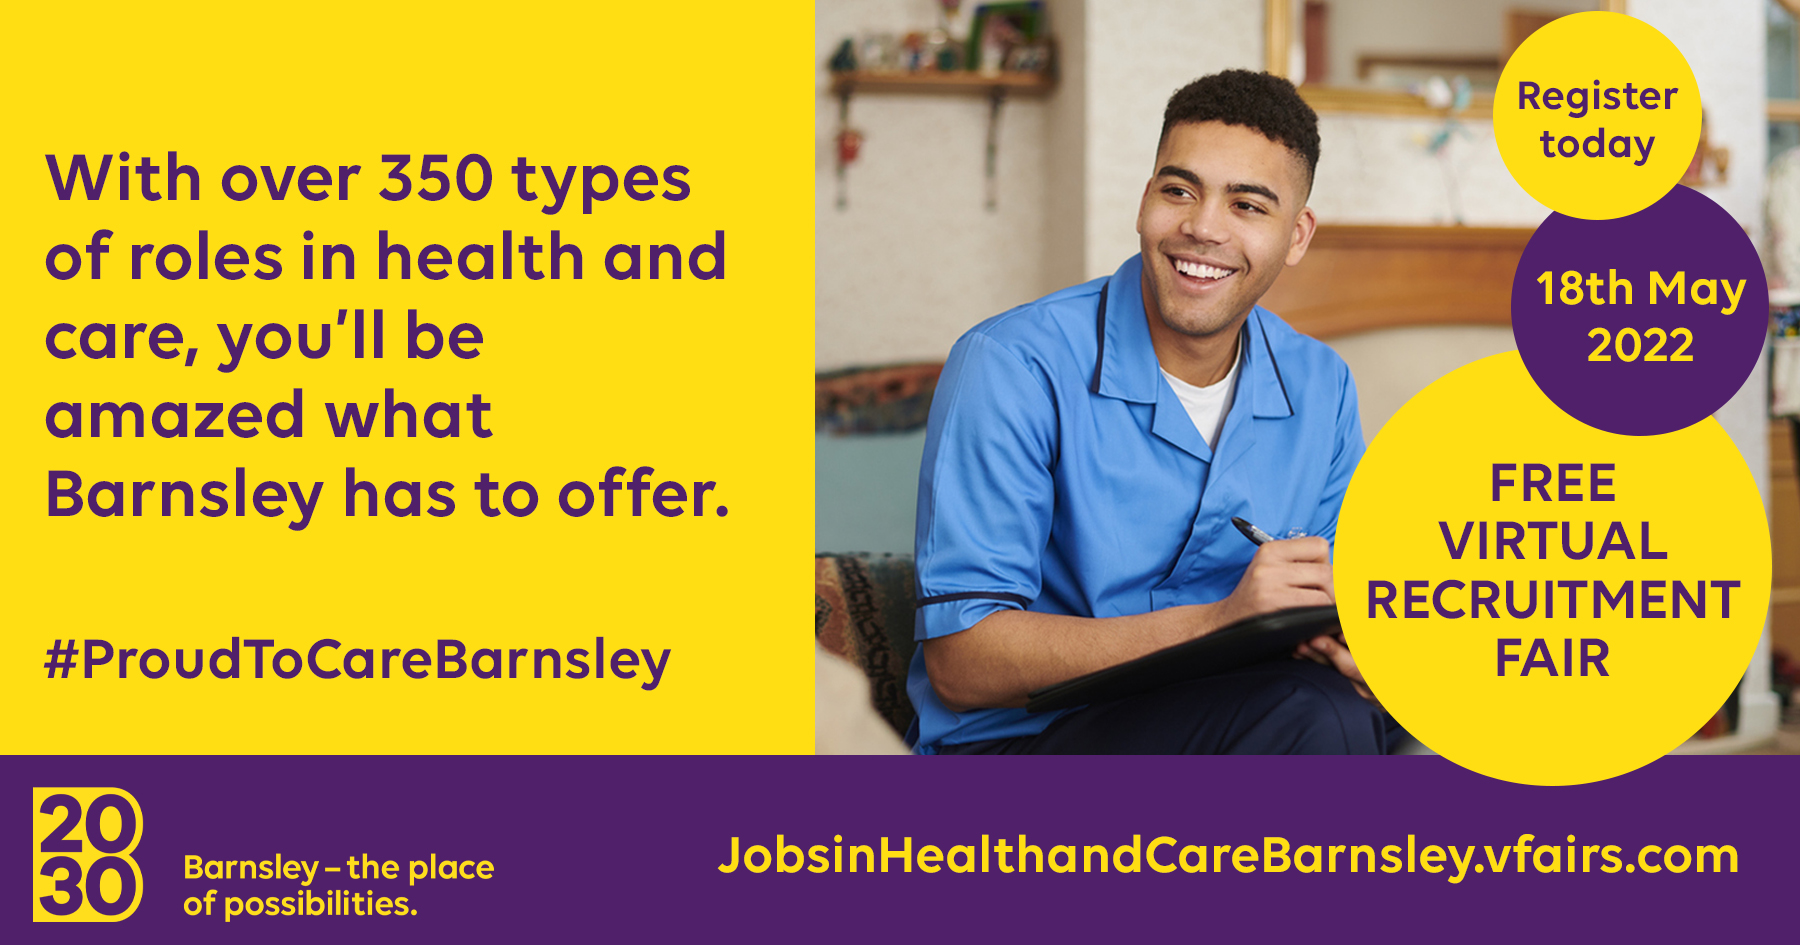 With over 350 types of roles in health and care, you'll be amazed what Barnsley has to offer. #ProudToCareBarnsley